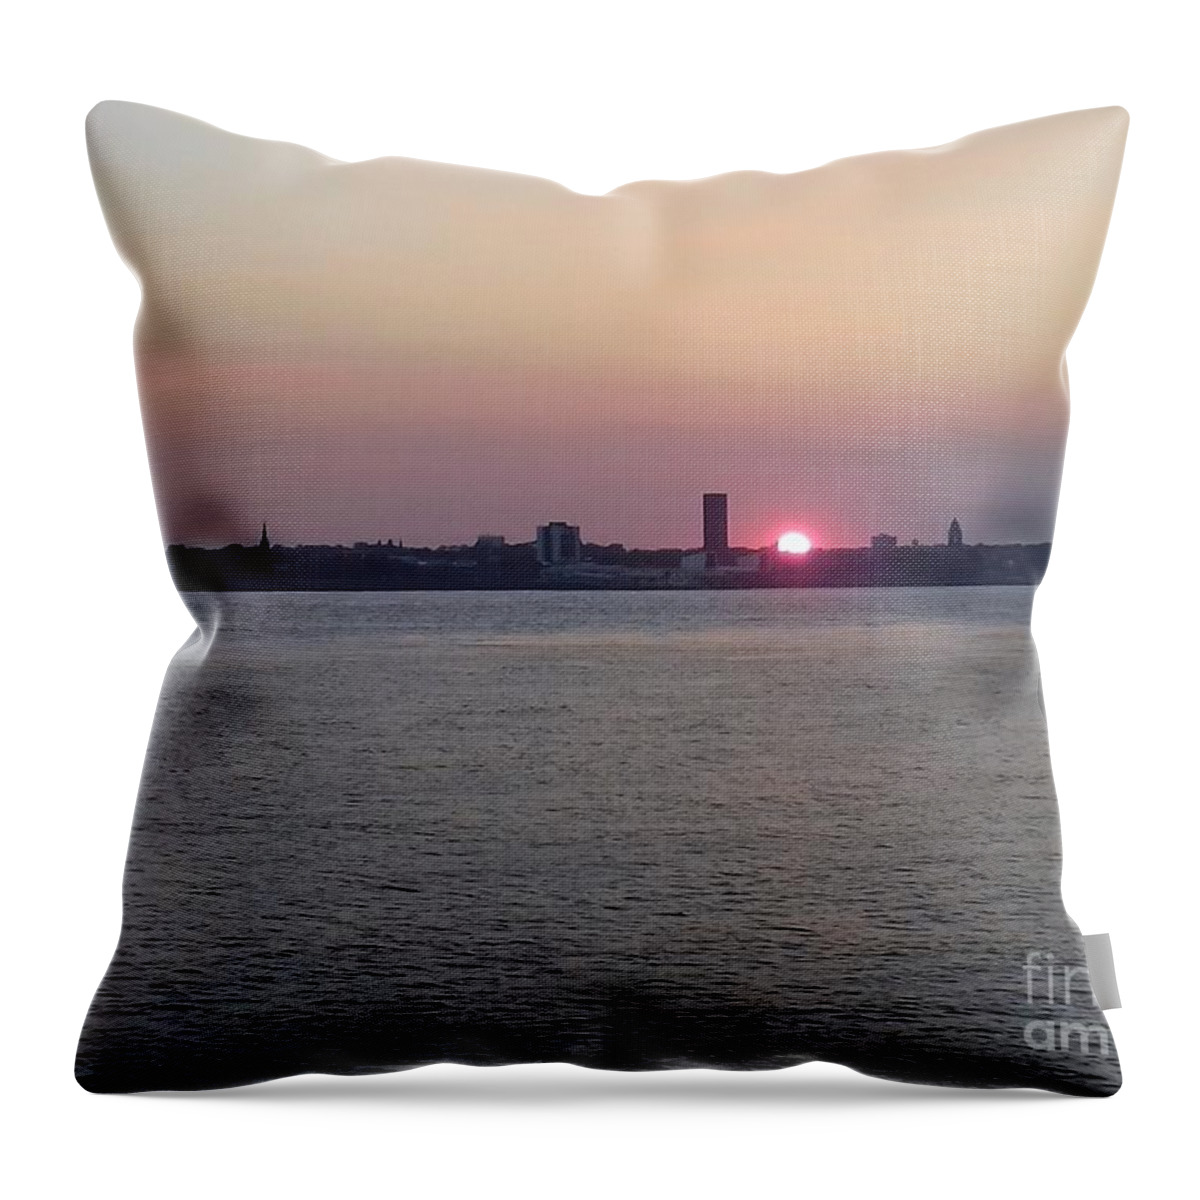 The River Mersey Throw Pillow featuring the photograph A Quiet Sunset Over The River Mersey by Joan-Violet Stretch